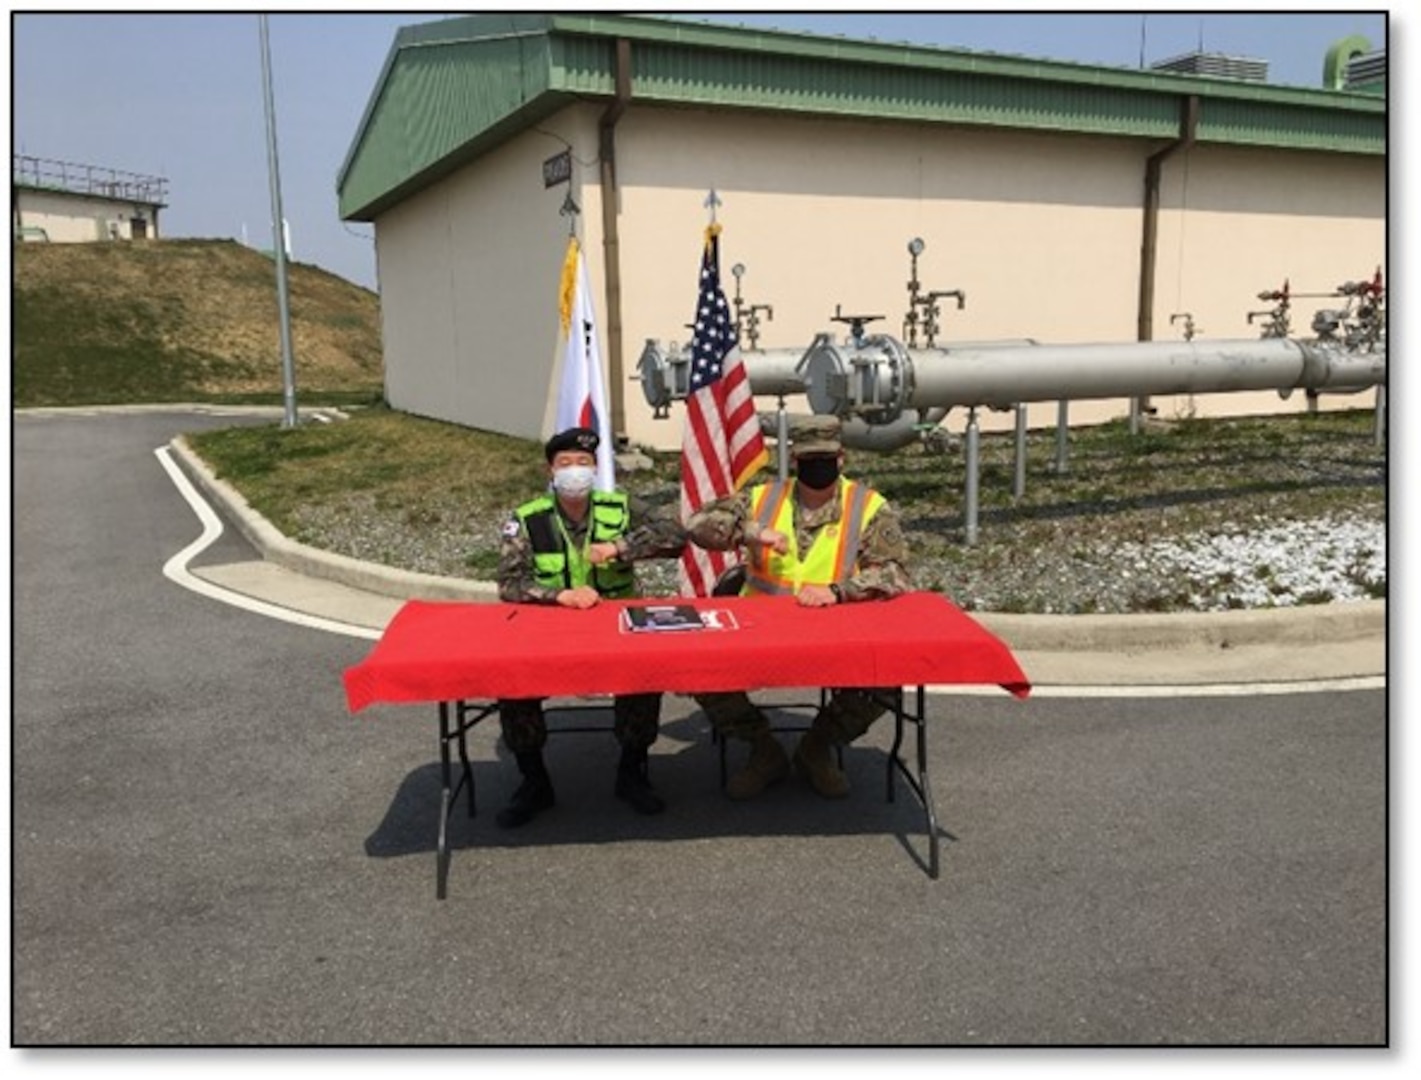 Completion of Phase I Fuel Oil Facility, improves USFK warfighter capabilities